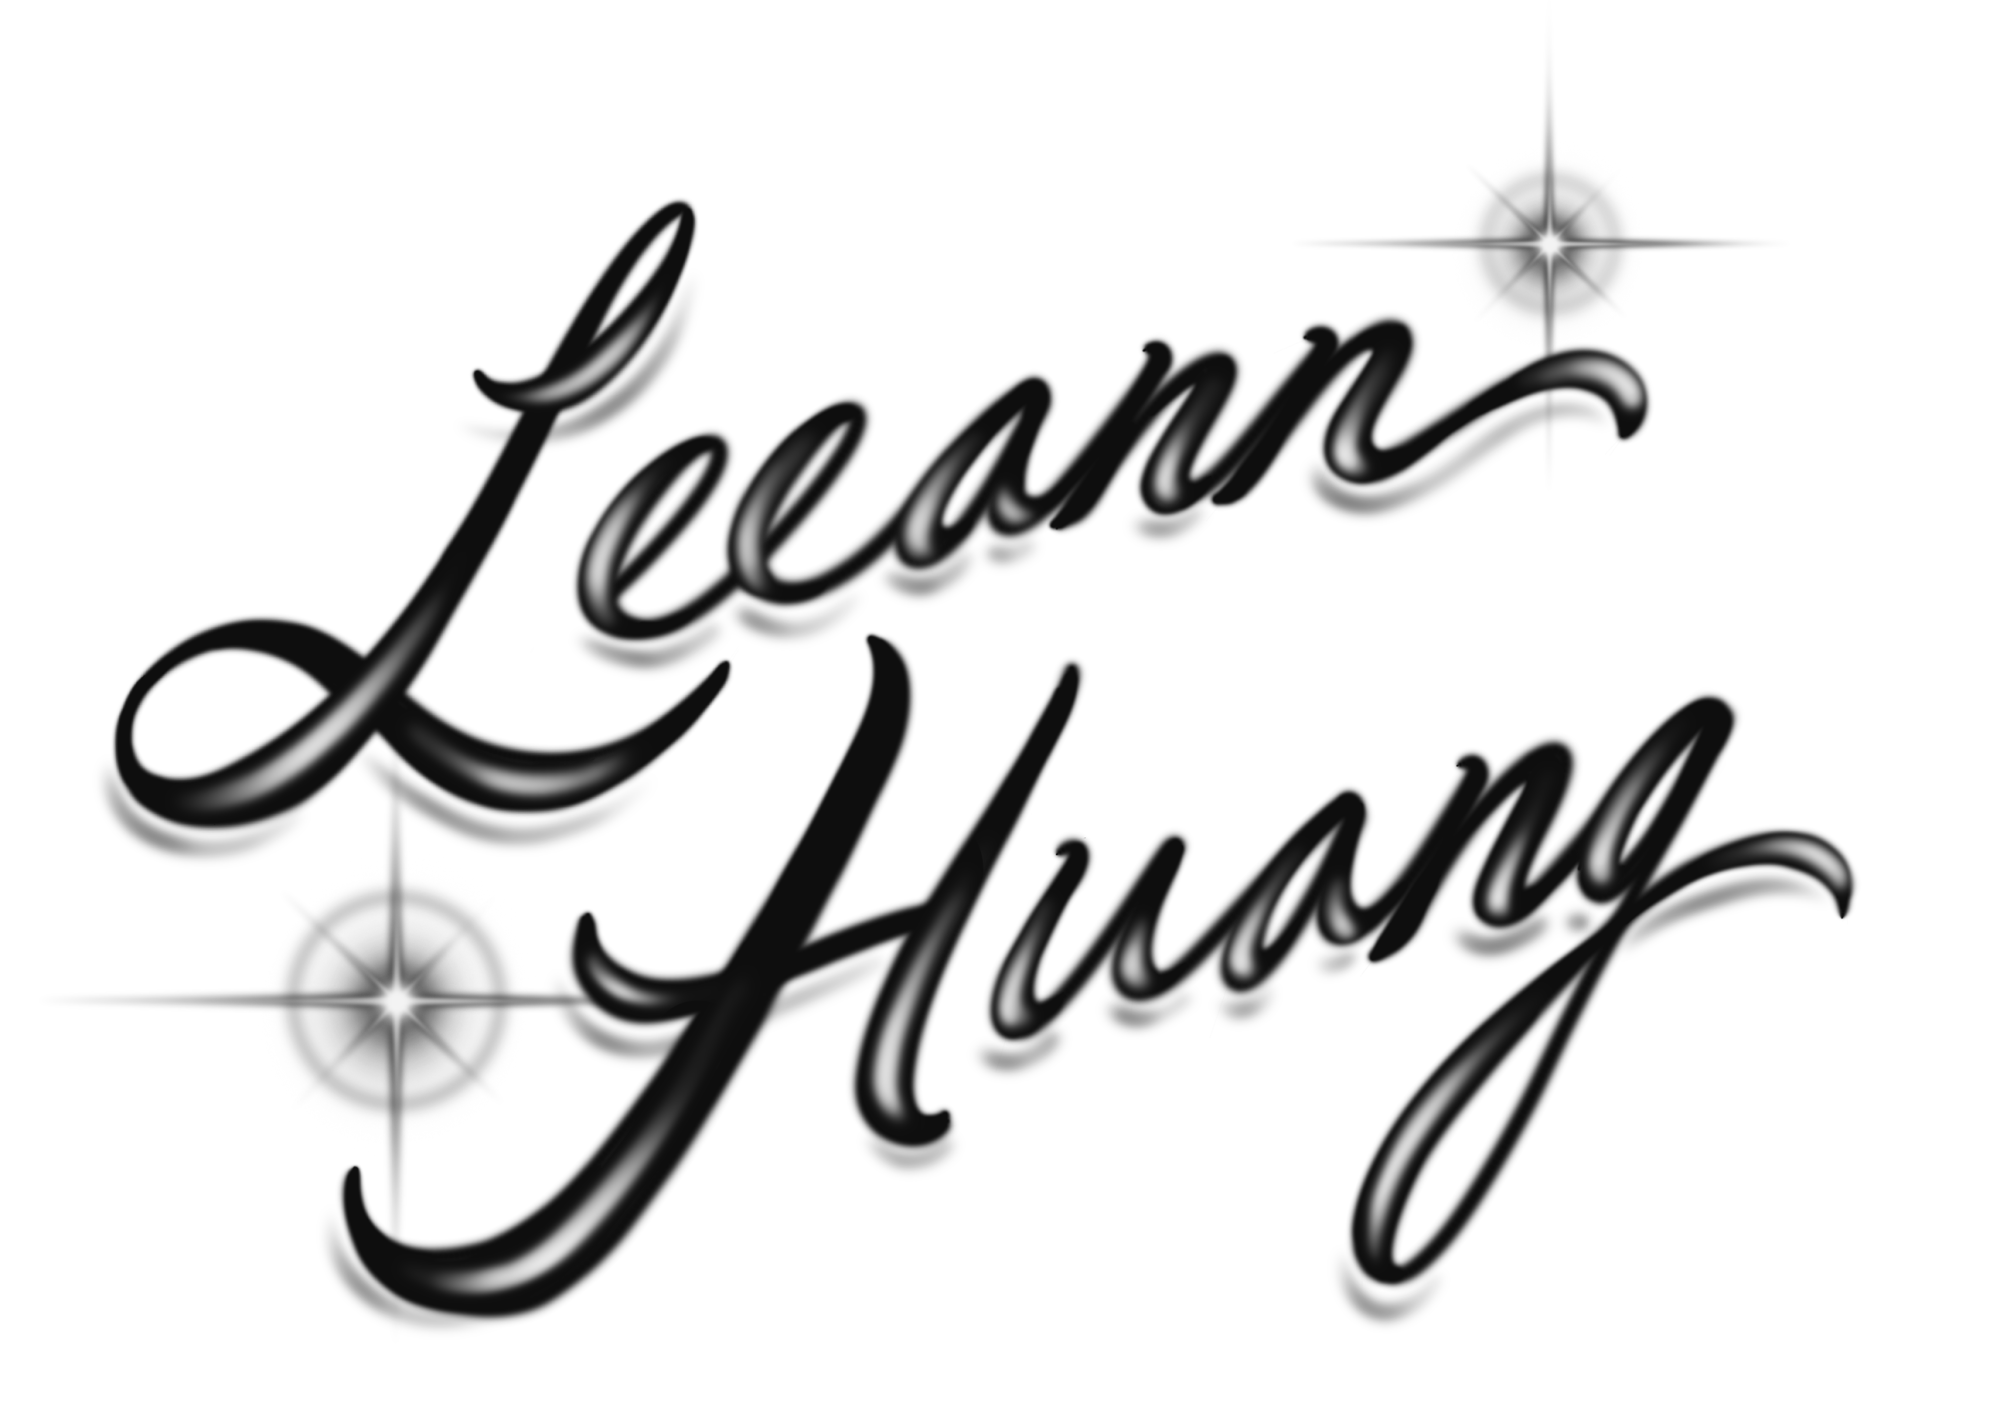 script that reads “Leeann Huang” surrounded by flare graphics